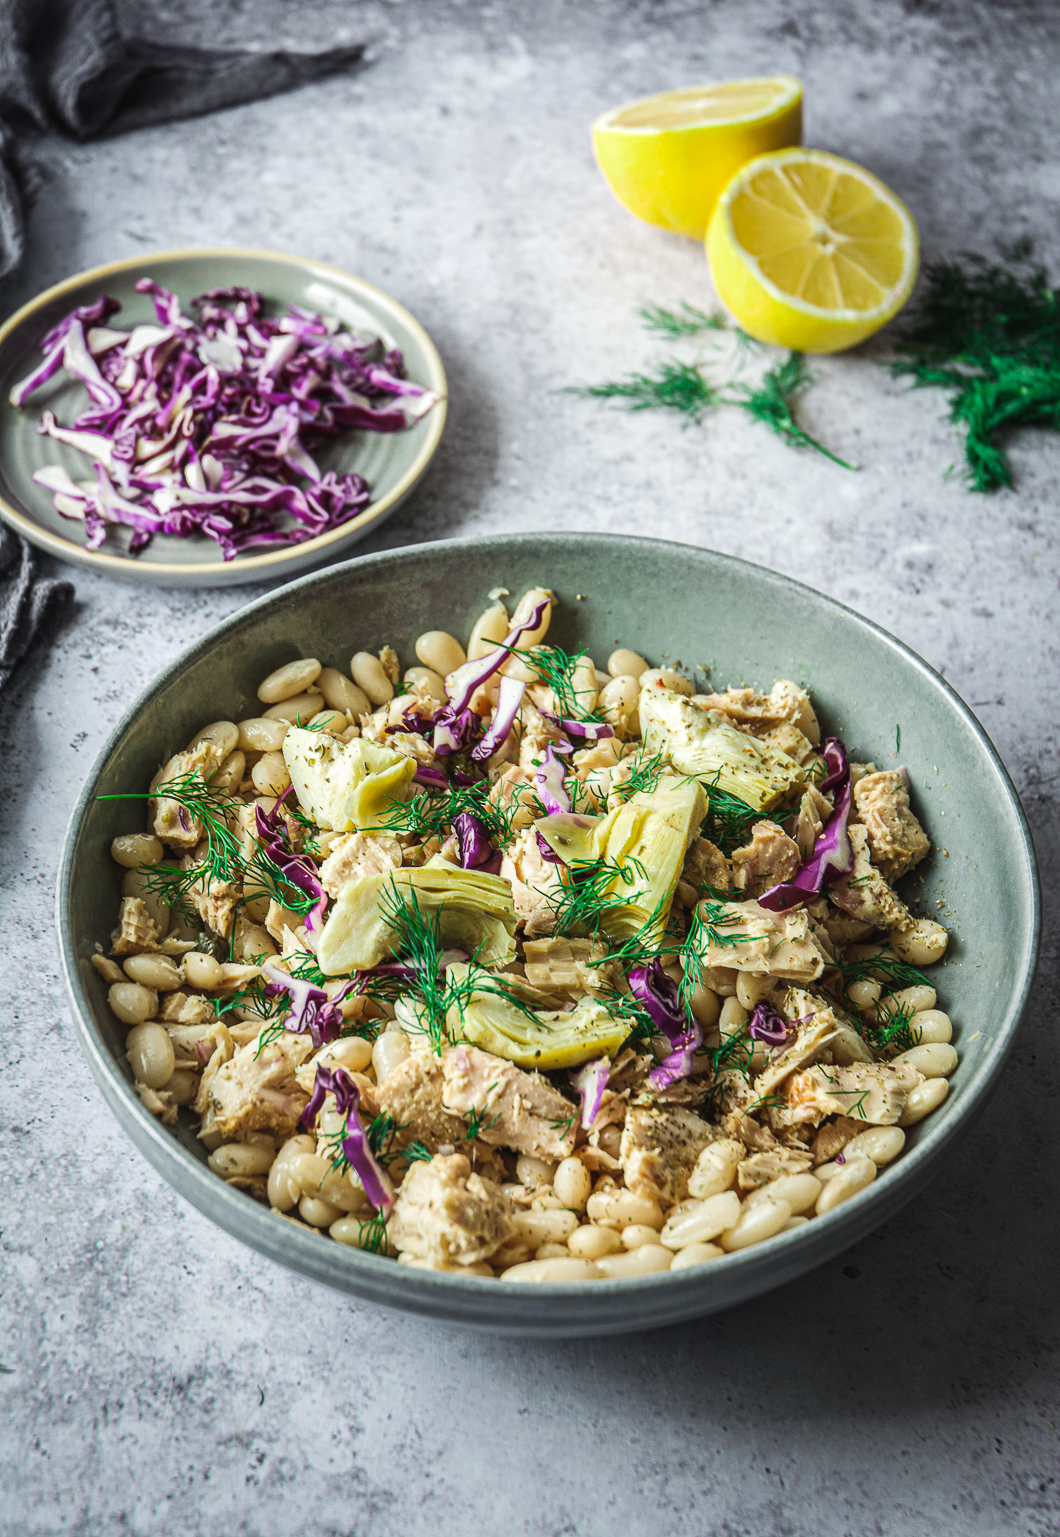 White Bean Tuna Salad with Artichoke Hearts in bowl, sliced cabbage and lemon halves